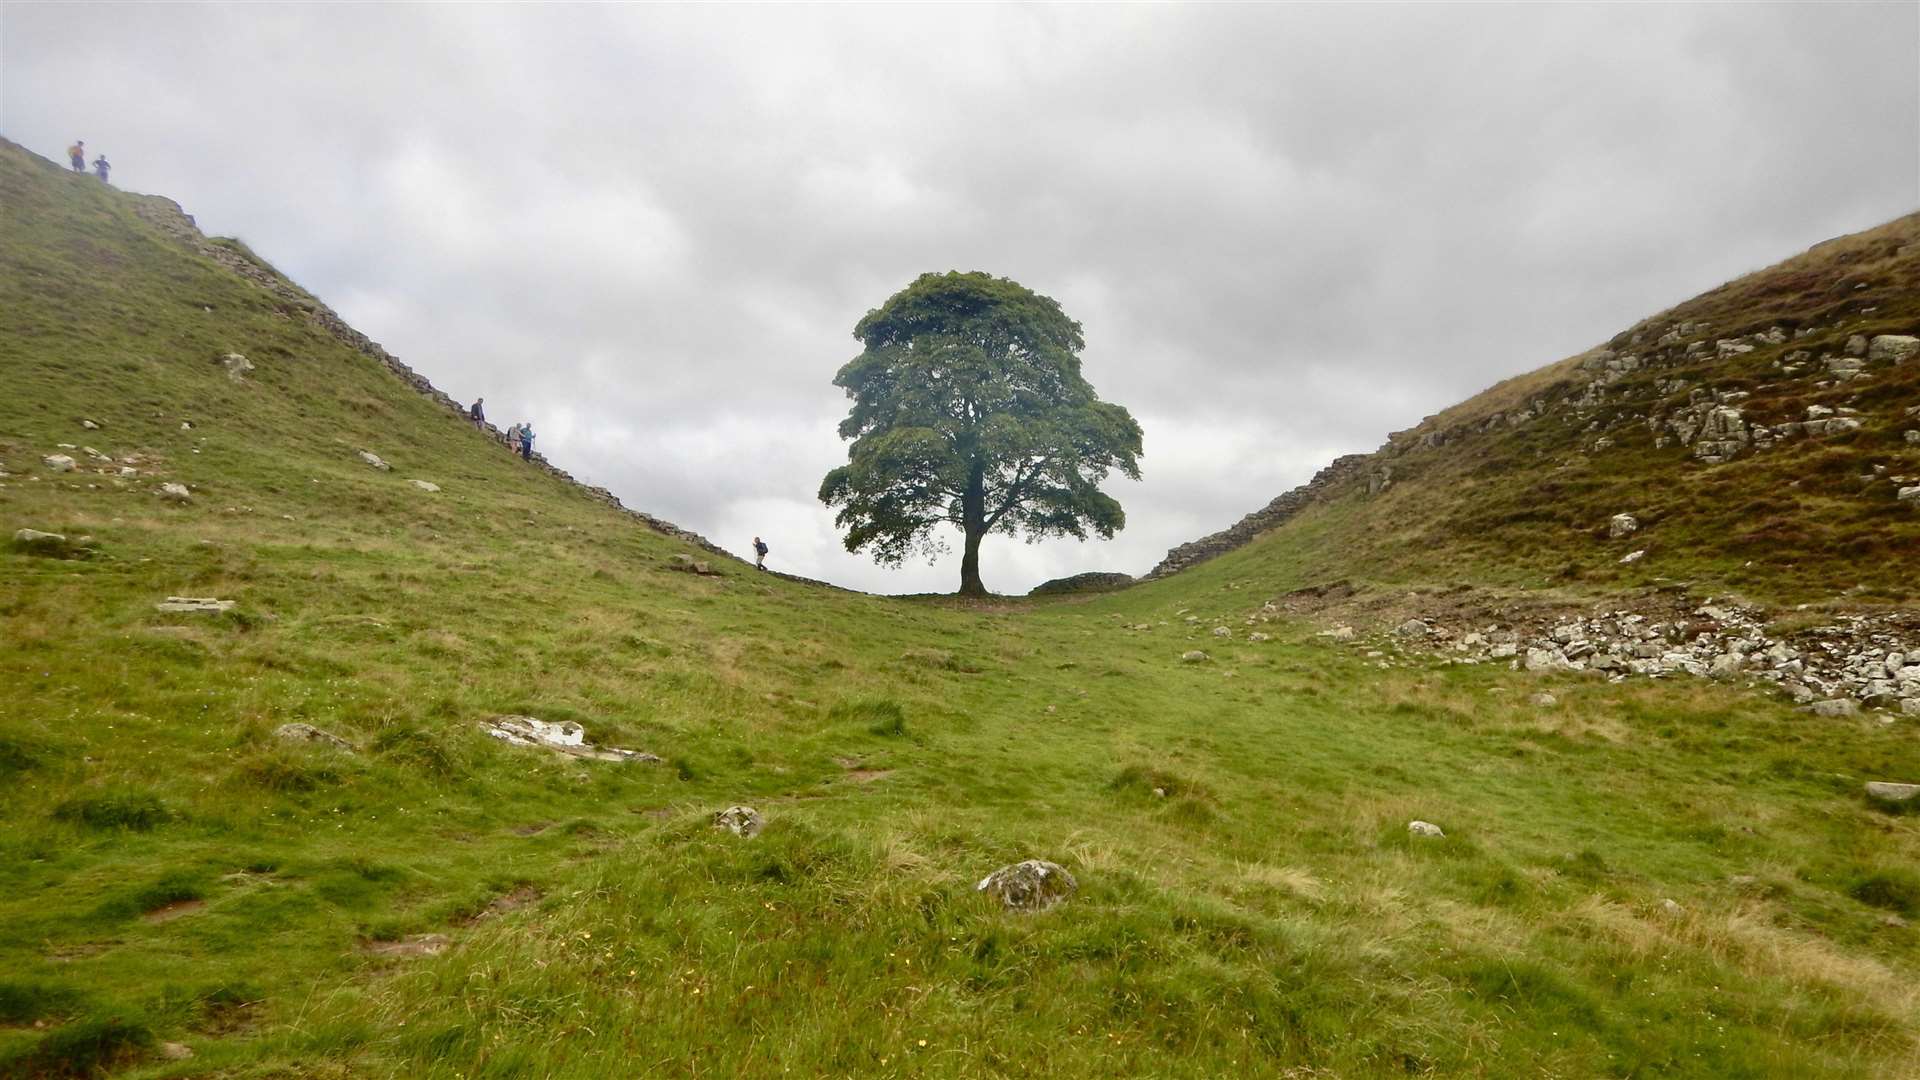 The classic view of Sycamore Gap. Picture: Douglas Law